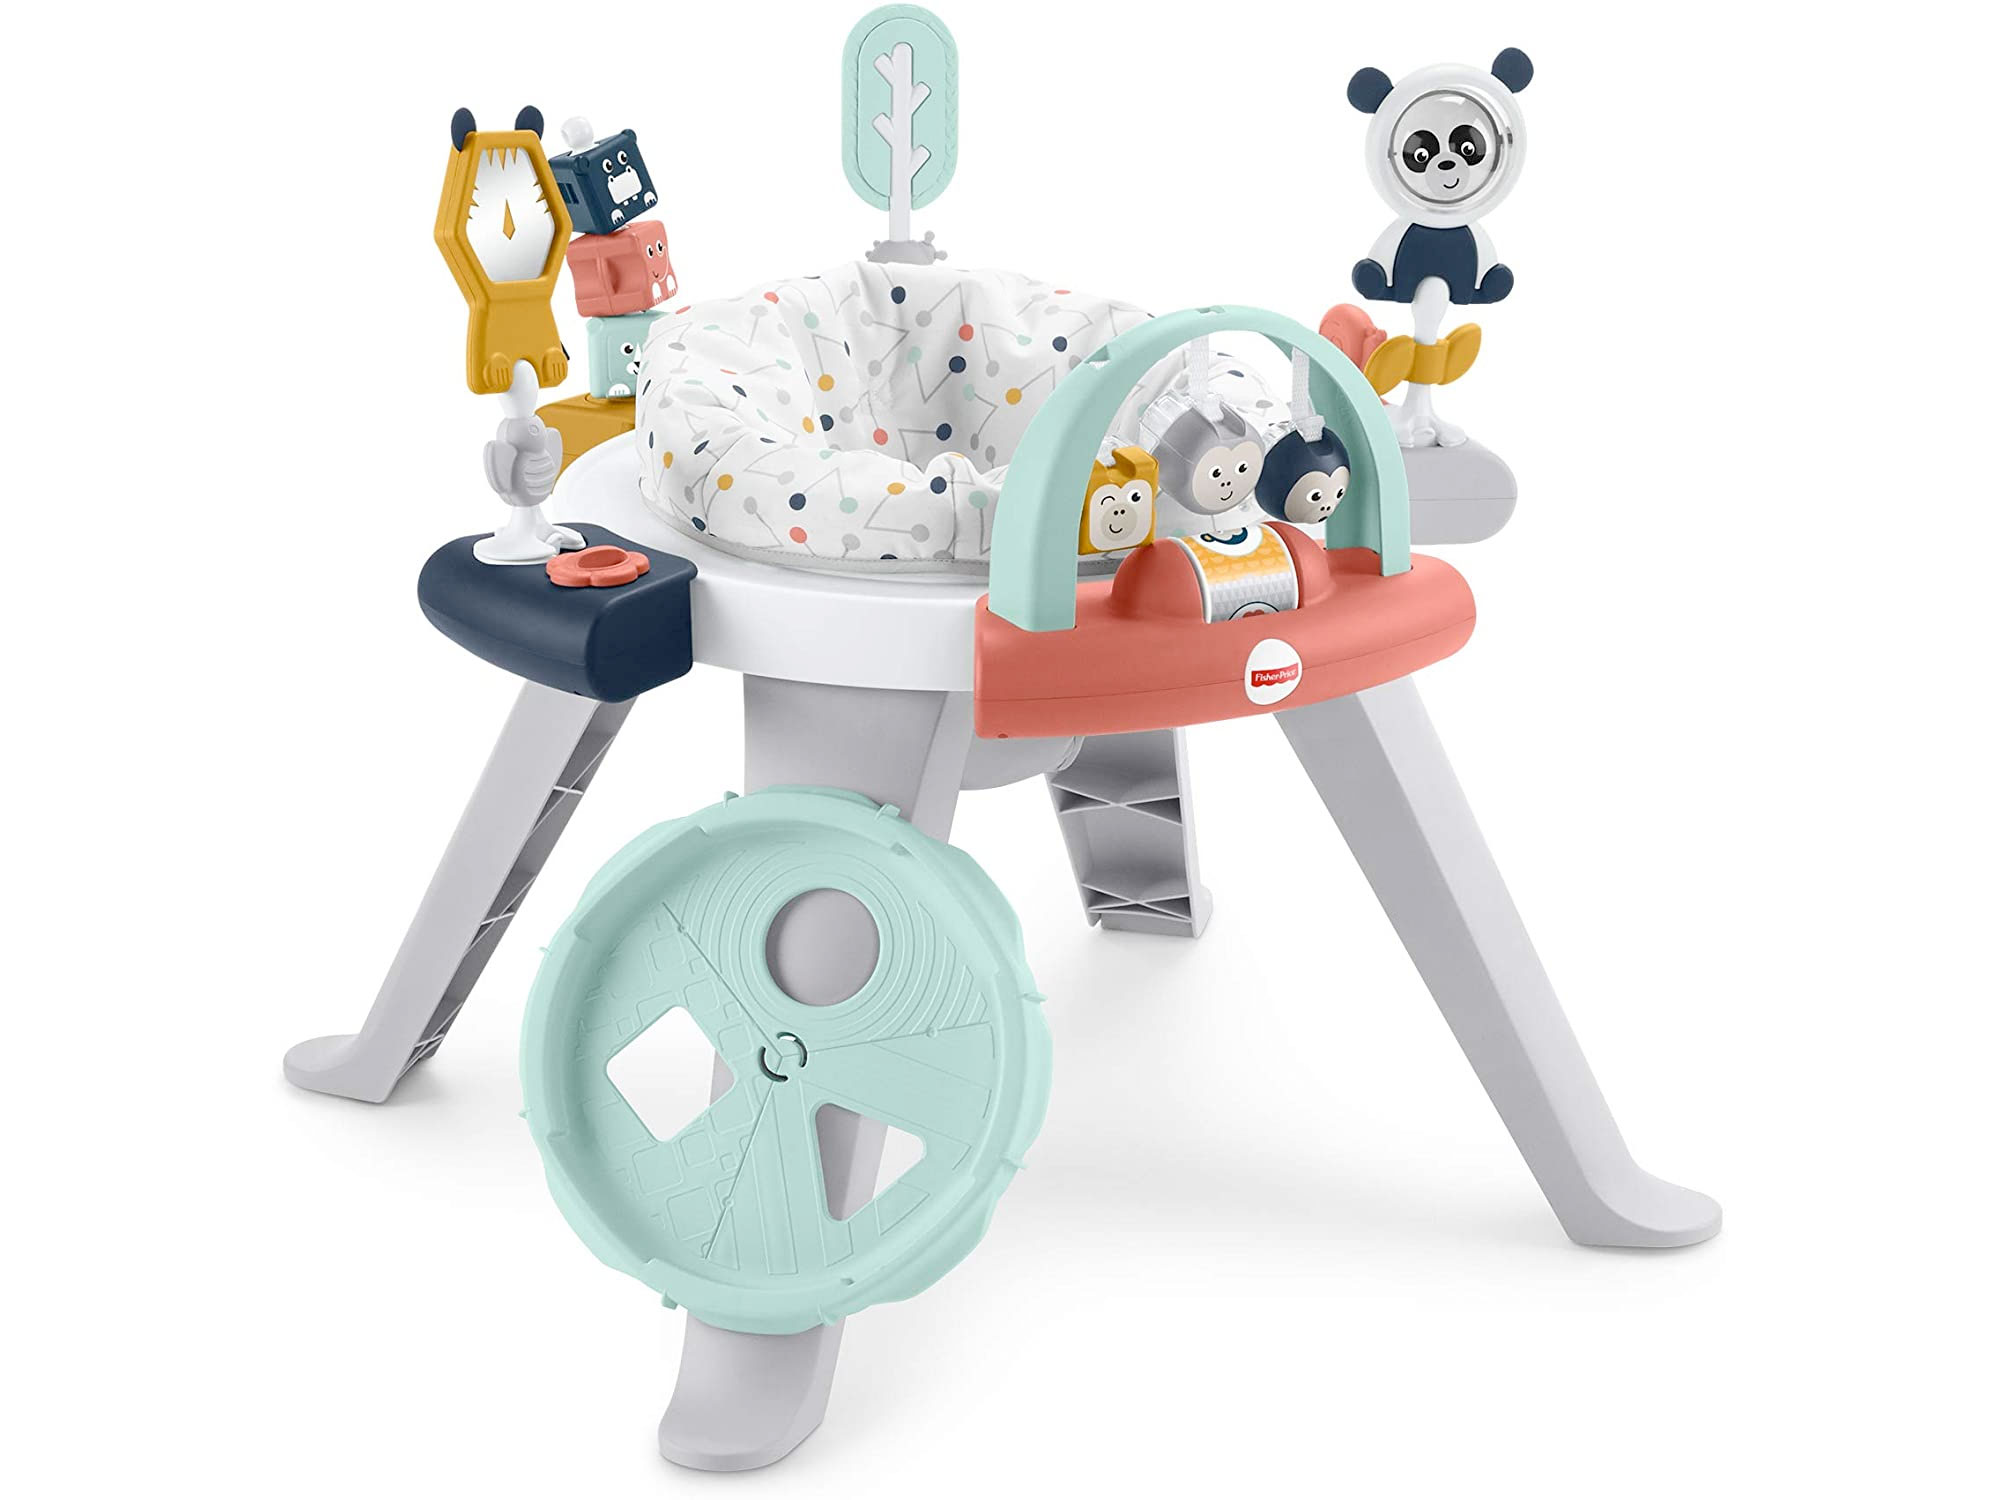 Amazon：Fisher-Price 3-In-1 Spin & Sort Activity Center只卖$48.98